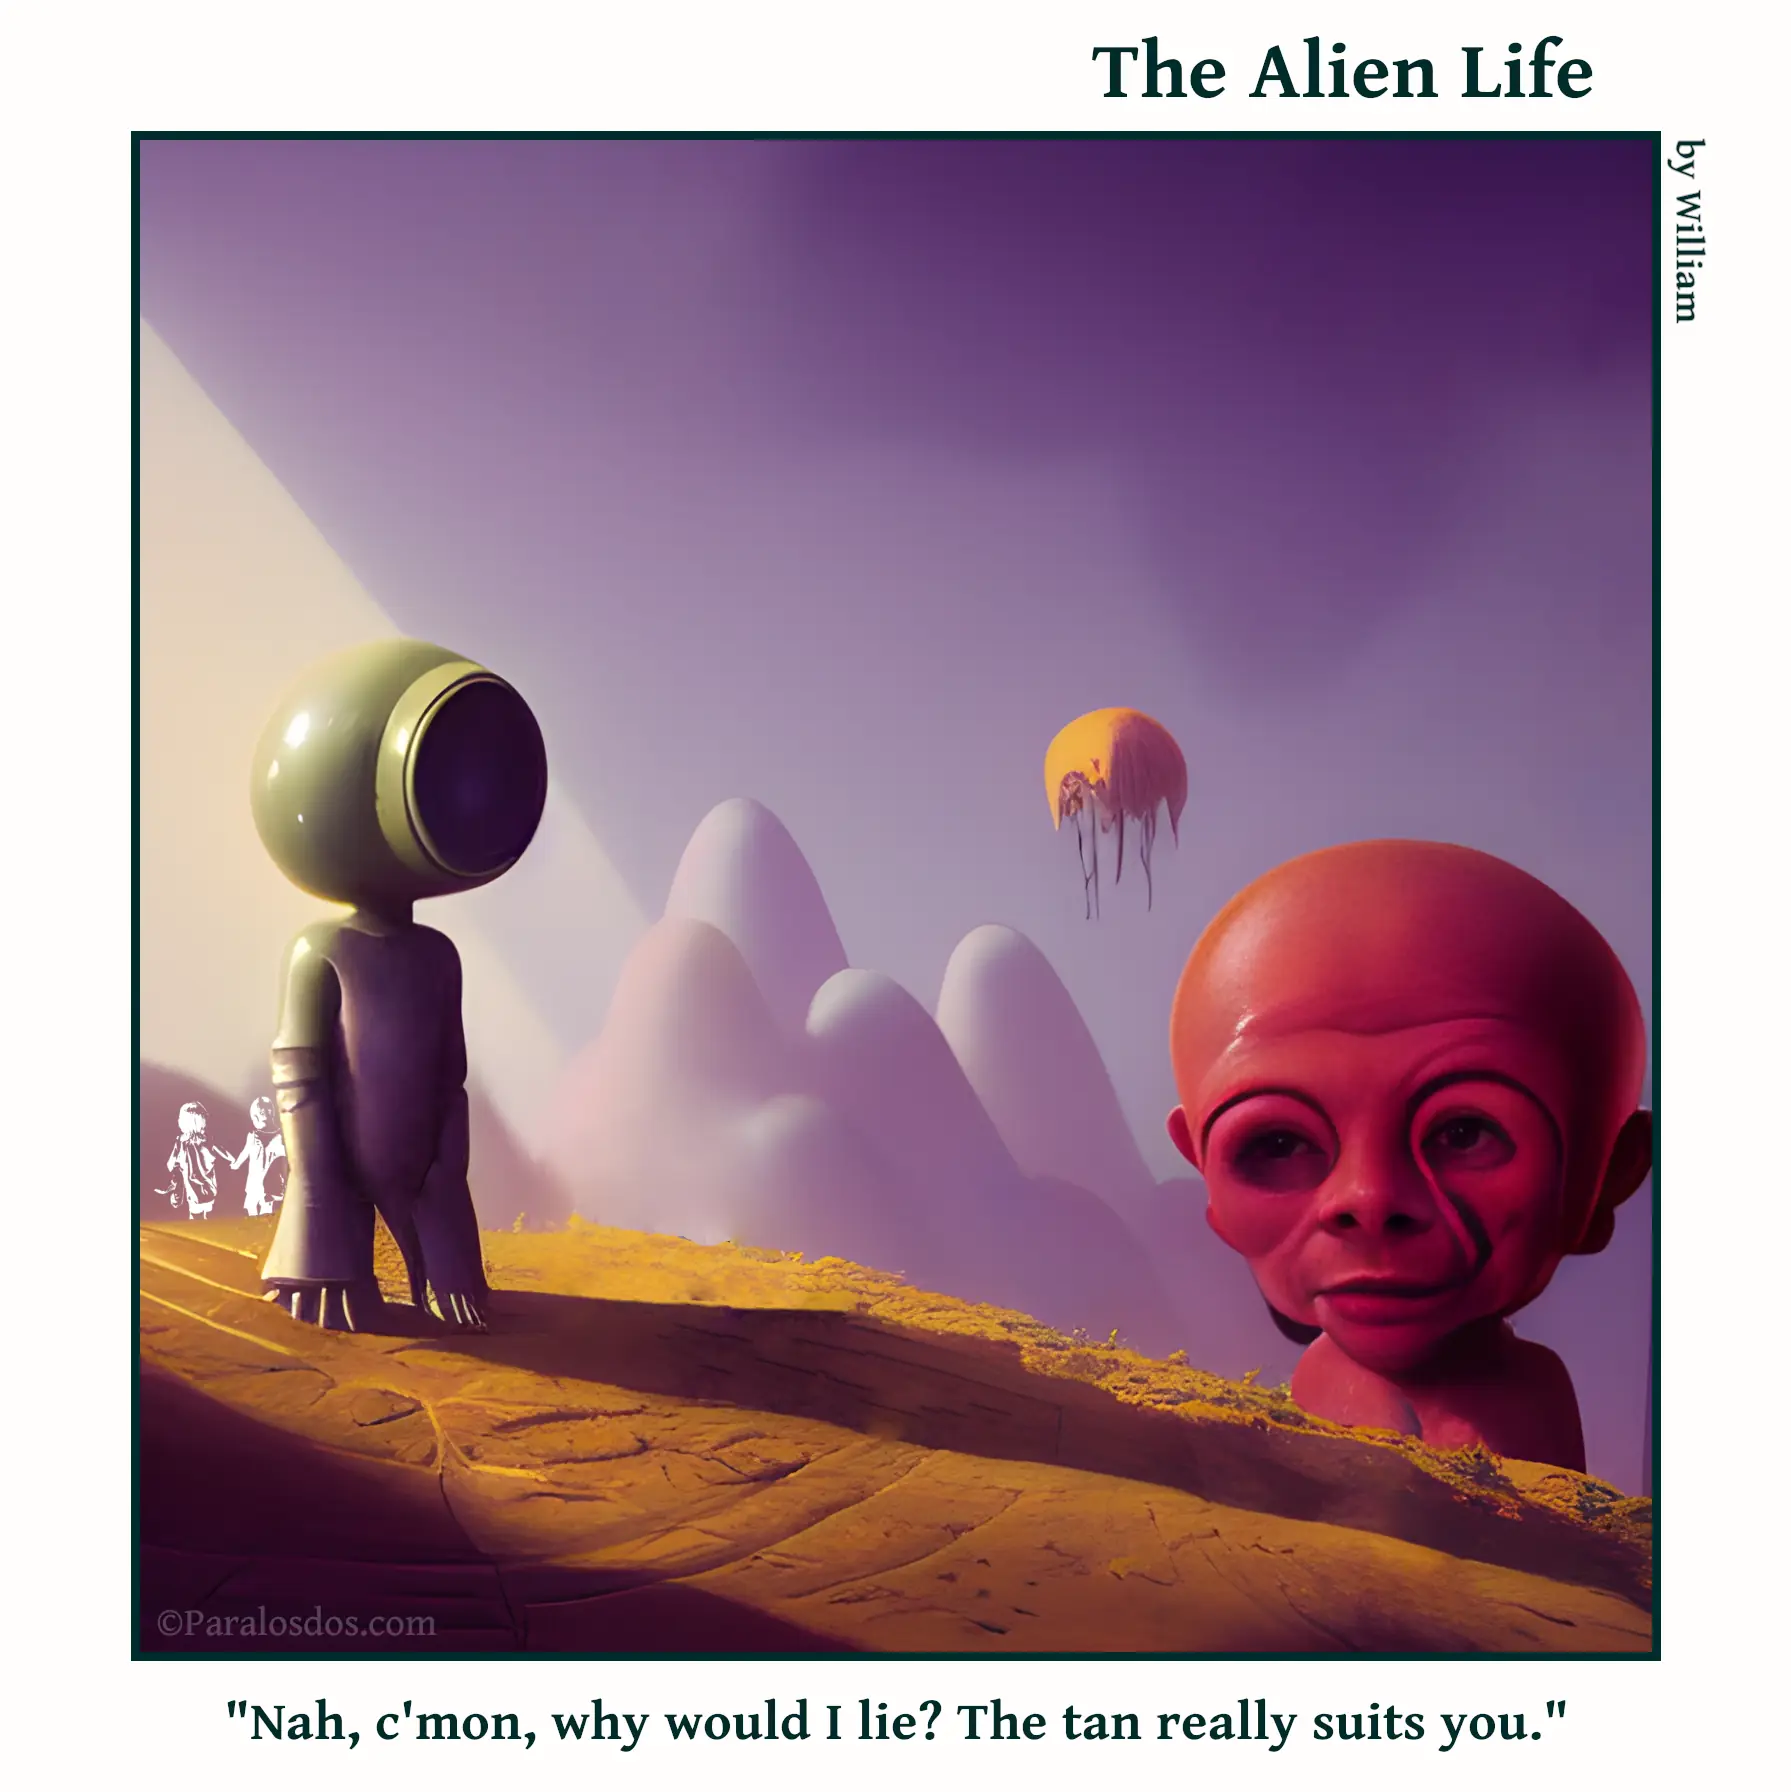 The Alien Life, one panel Comic. An alien is standing on a hill facing a huge alien walking towards the hill, we only see the huge alien's head and shoulders. The caption reads: "Nah, c'mon, why would I lie? The tan really suits you."